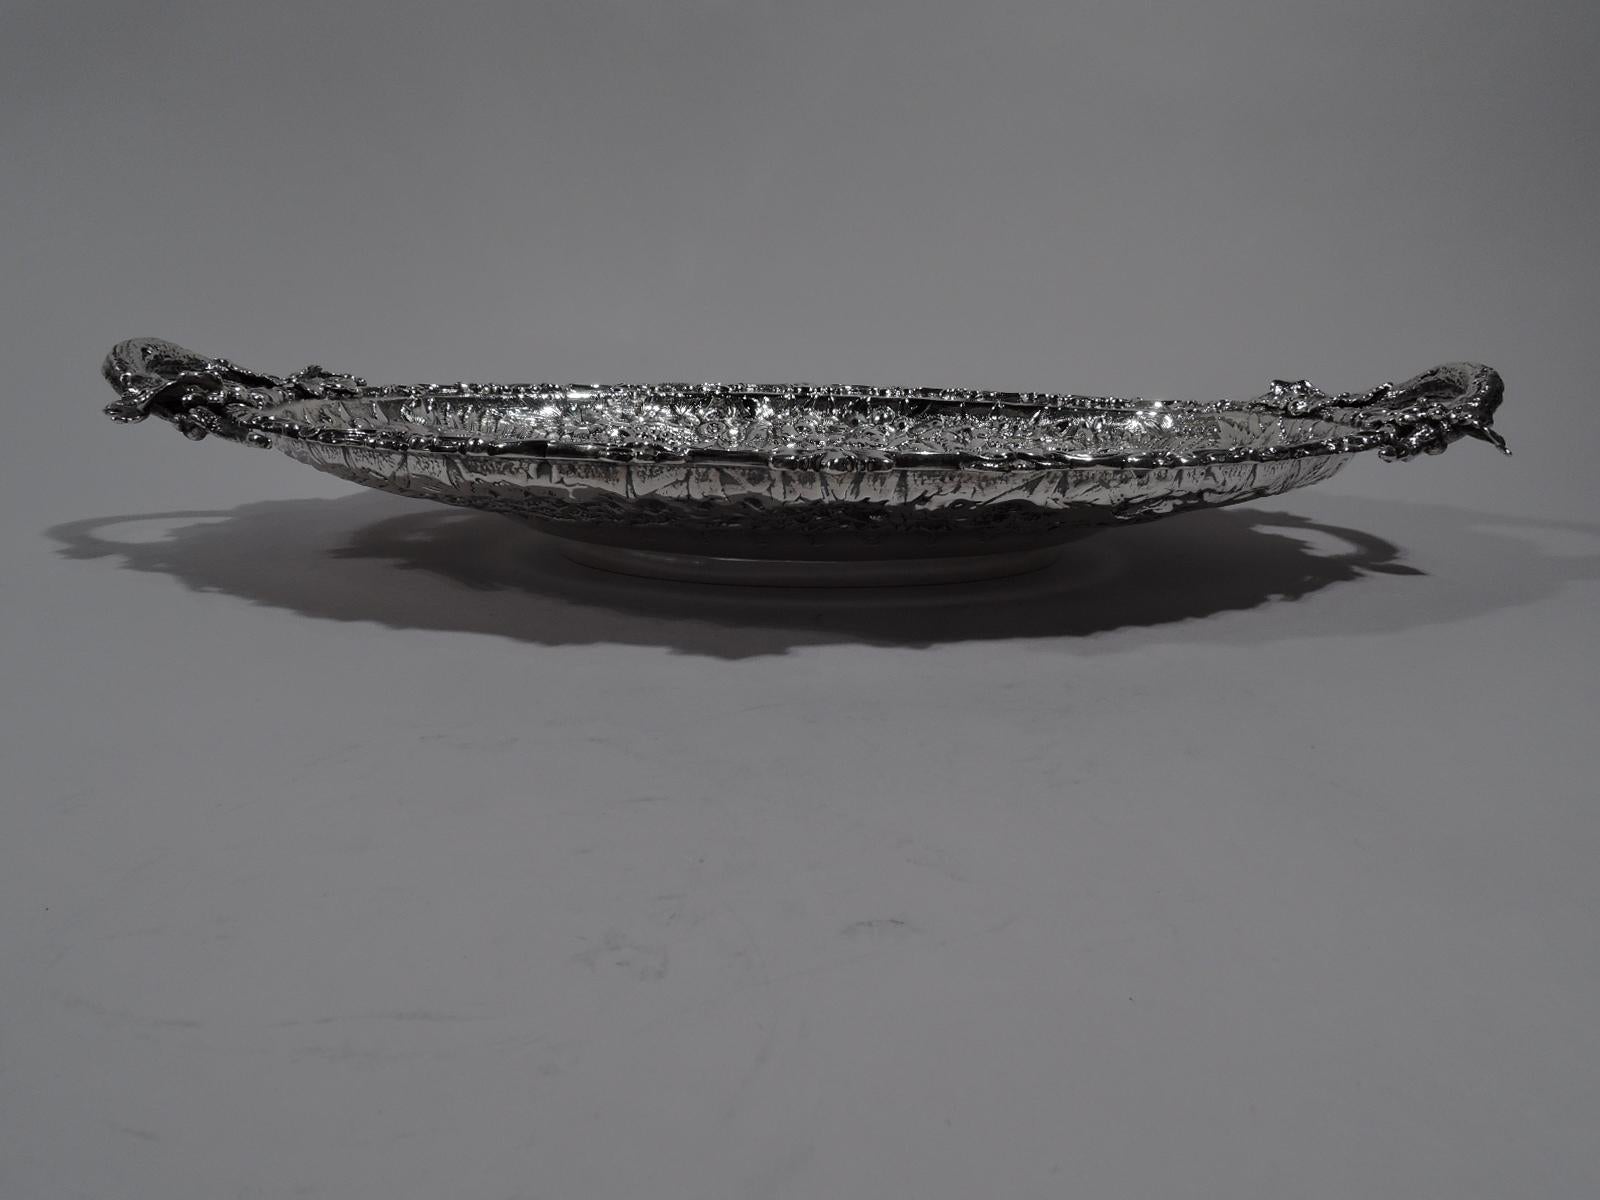 Fancy repousse sterling silver serving platter. Made by Tiffany & Co. in New York. Plain oval well with leaf-and-dart border. Wide tapering shoulder with flowers and ferns on stippled ground. Rim has applied scrolls and flowers. C-scroll end branch